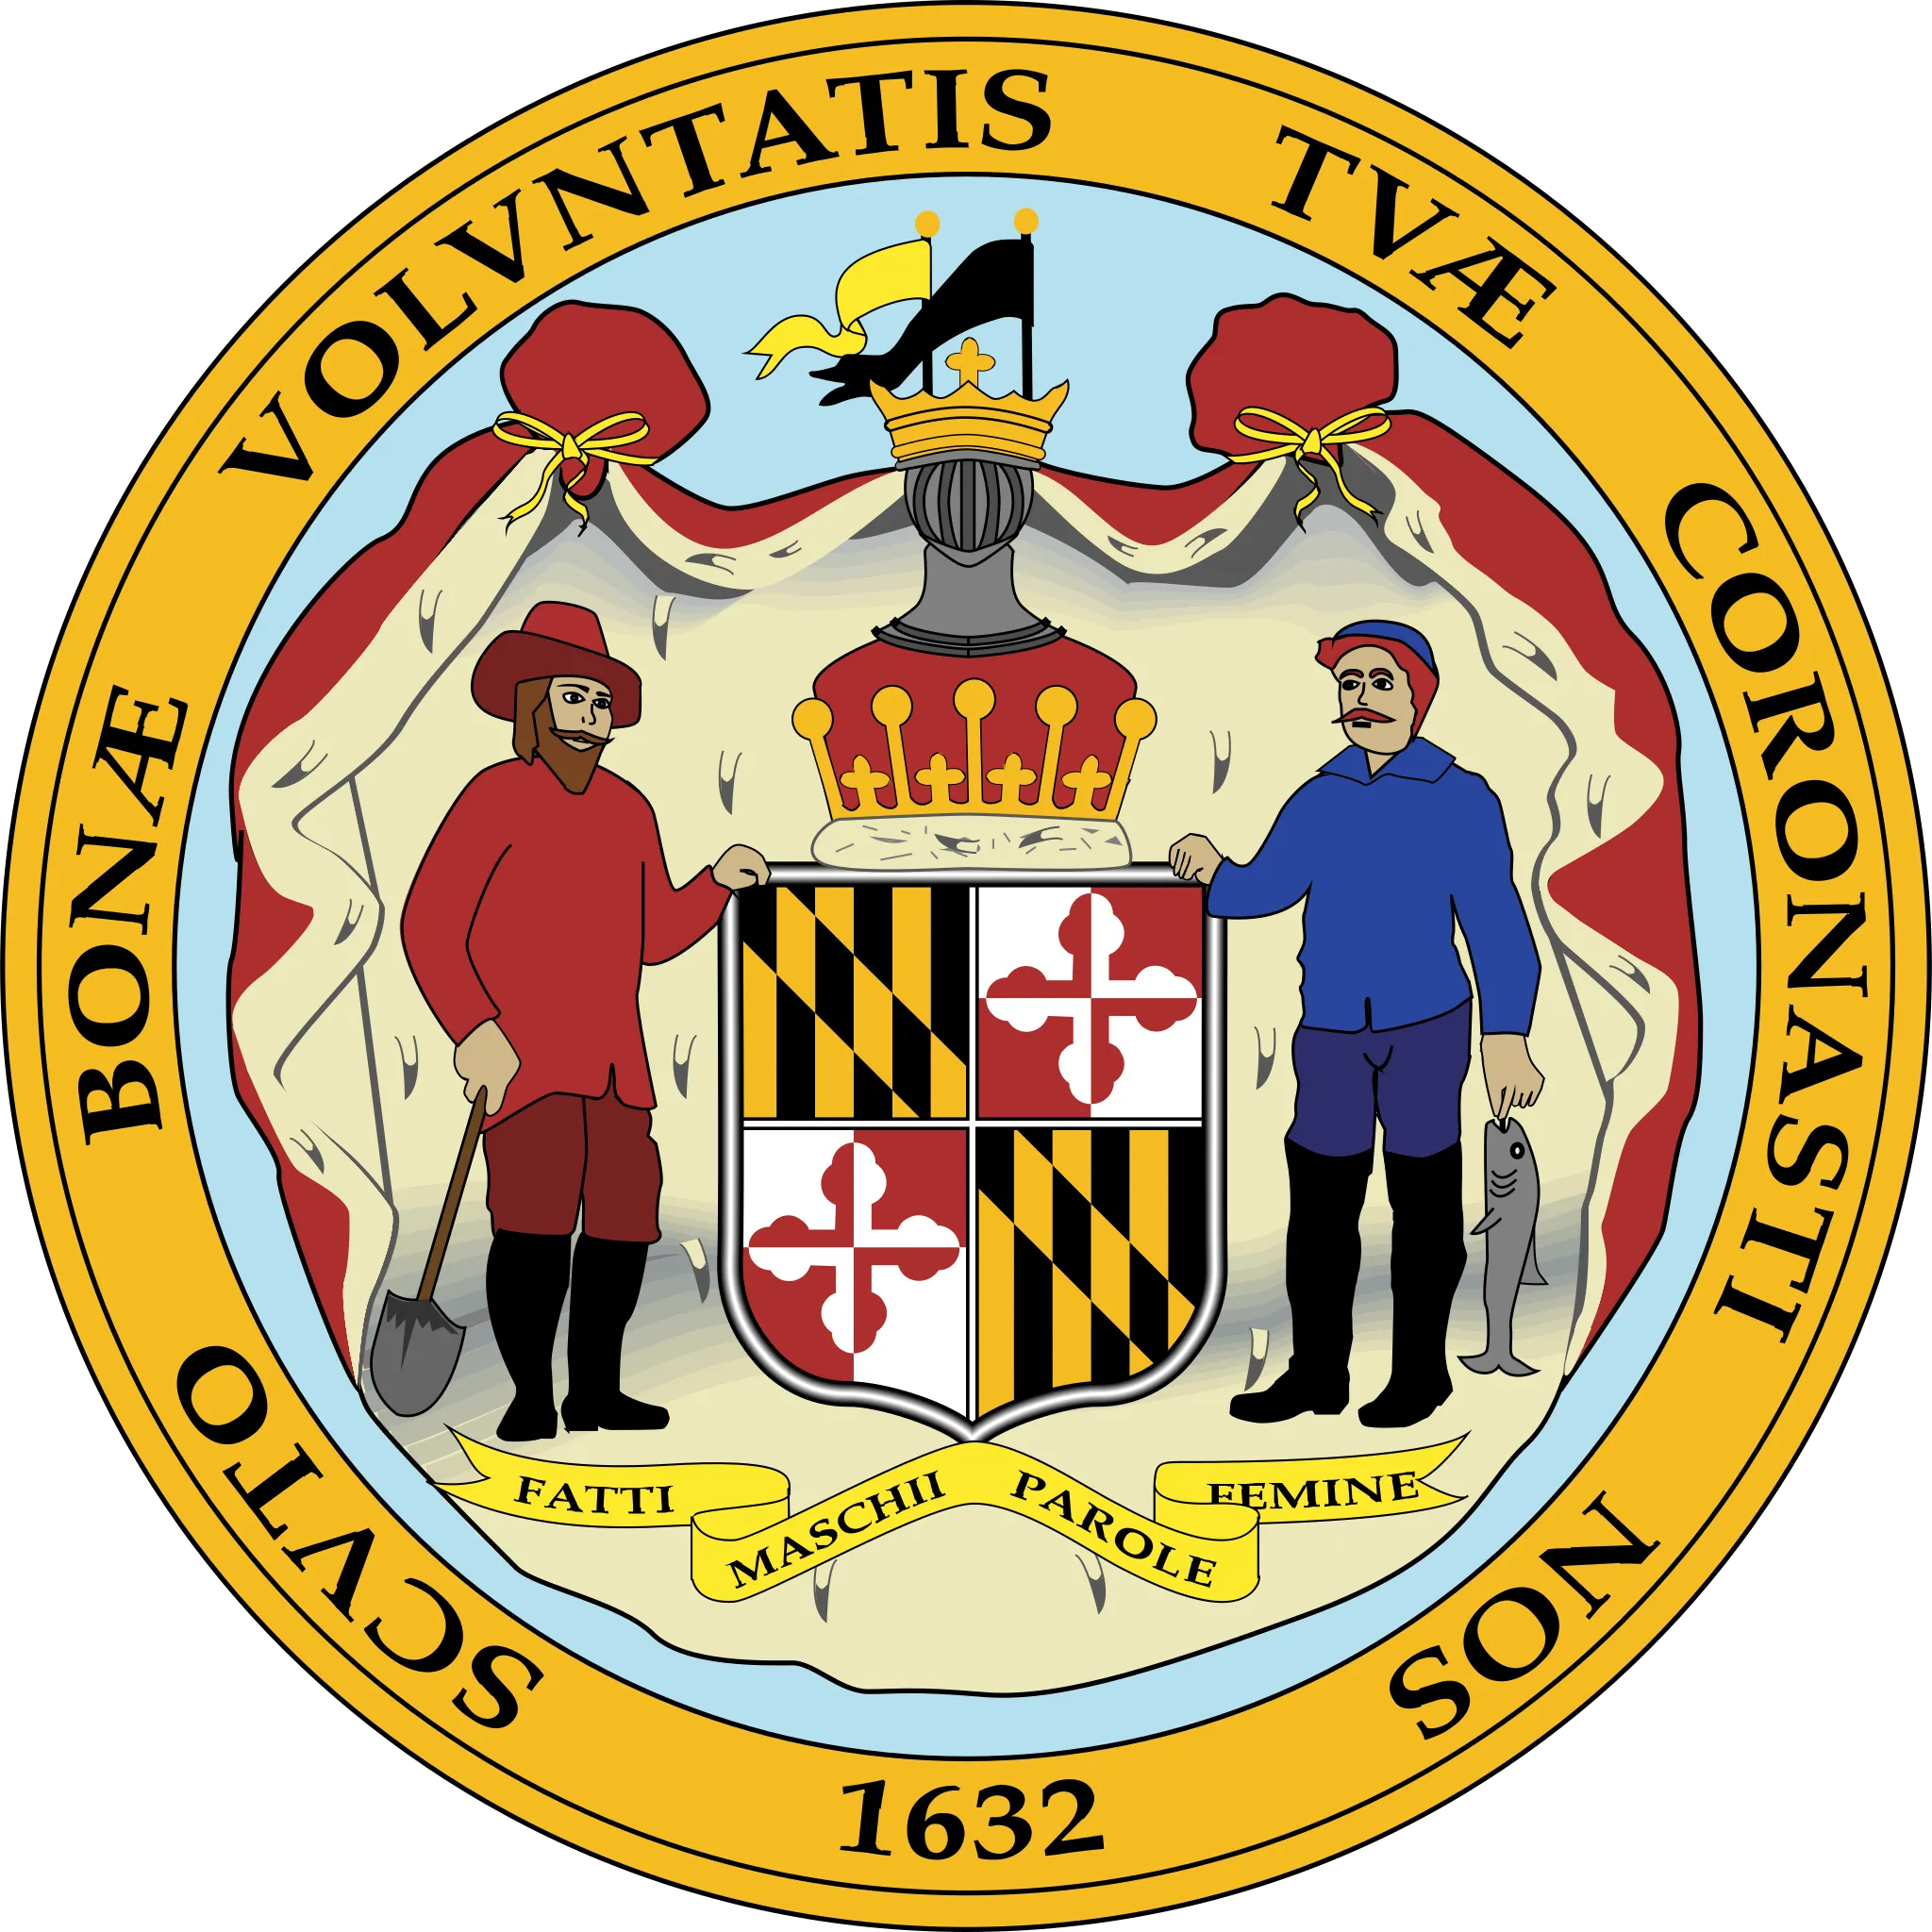 The Seal of Maryland